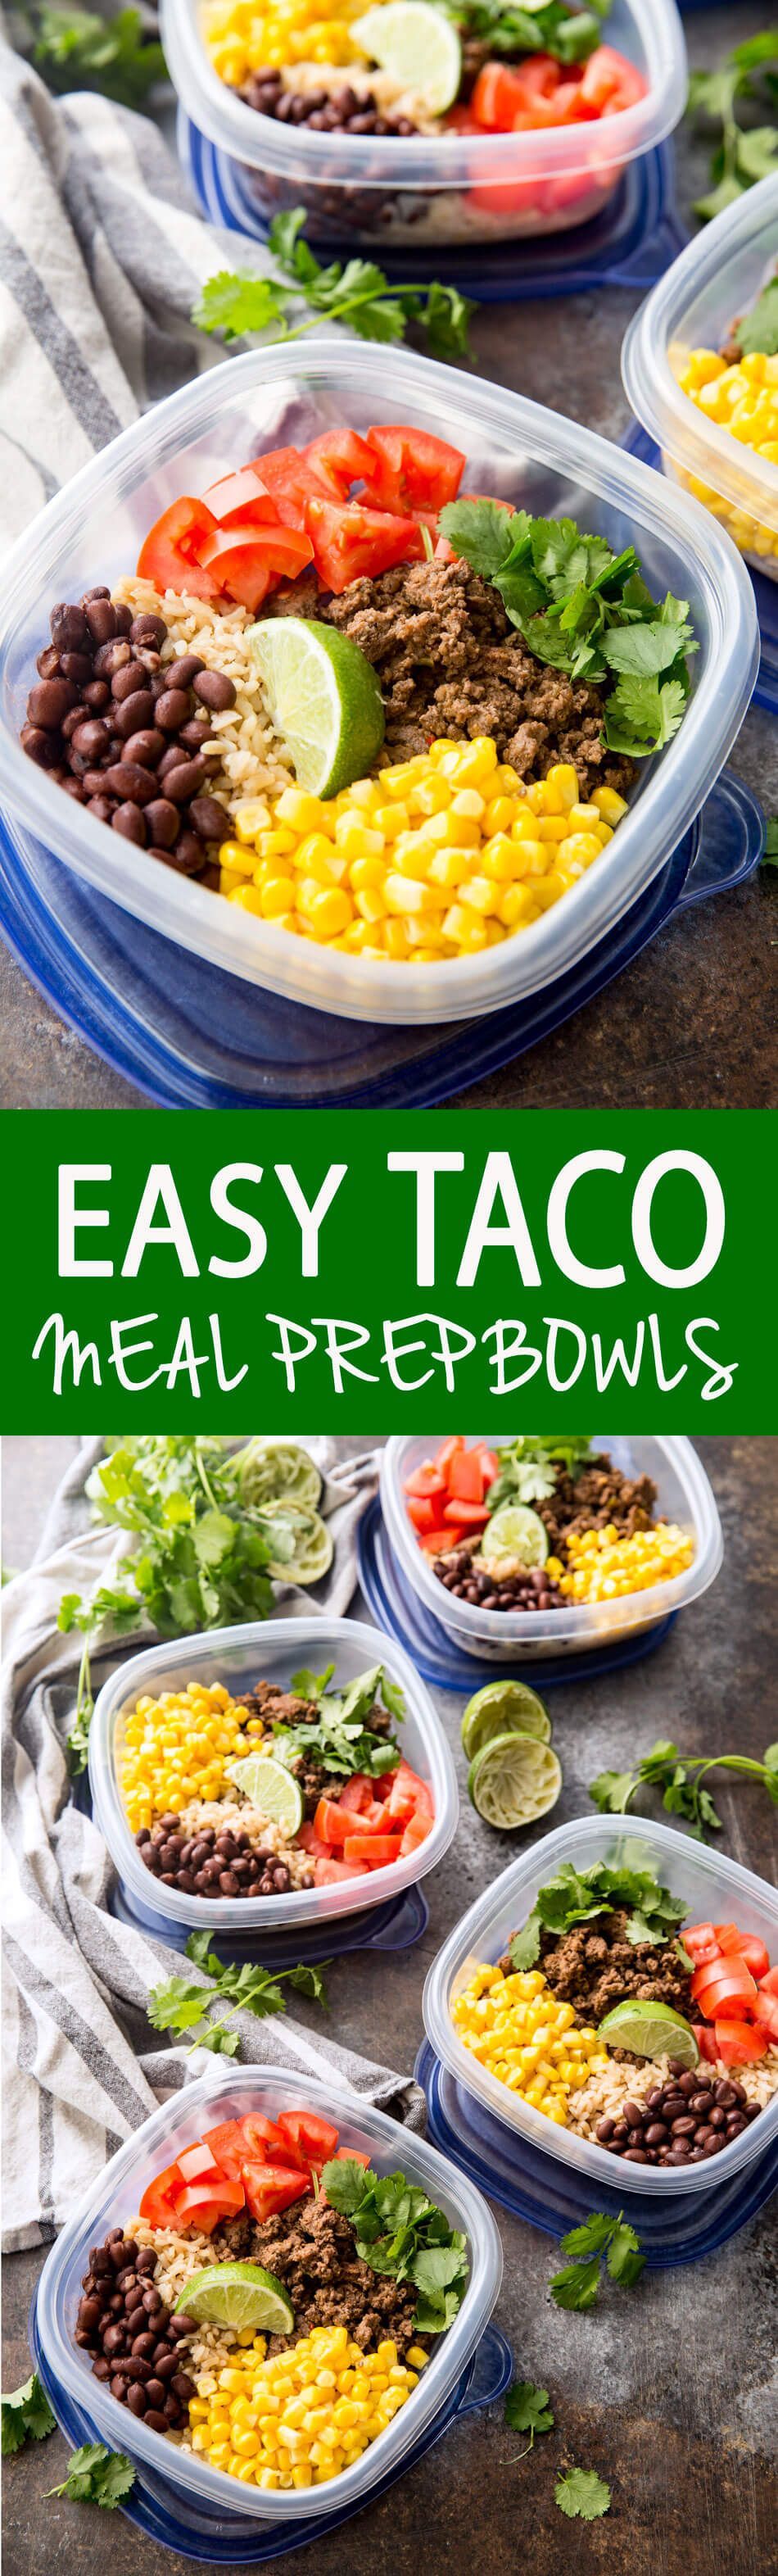 Easy Taco Meal Prep Bowls with Salsa Verde Beef and extras like corn, tomatoes, cilantro, and black beans. I swear these are